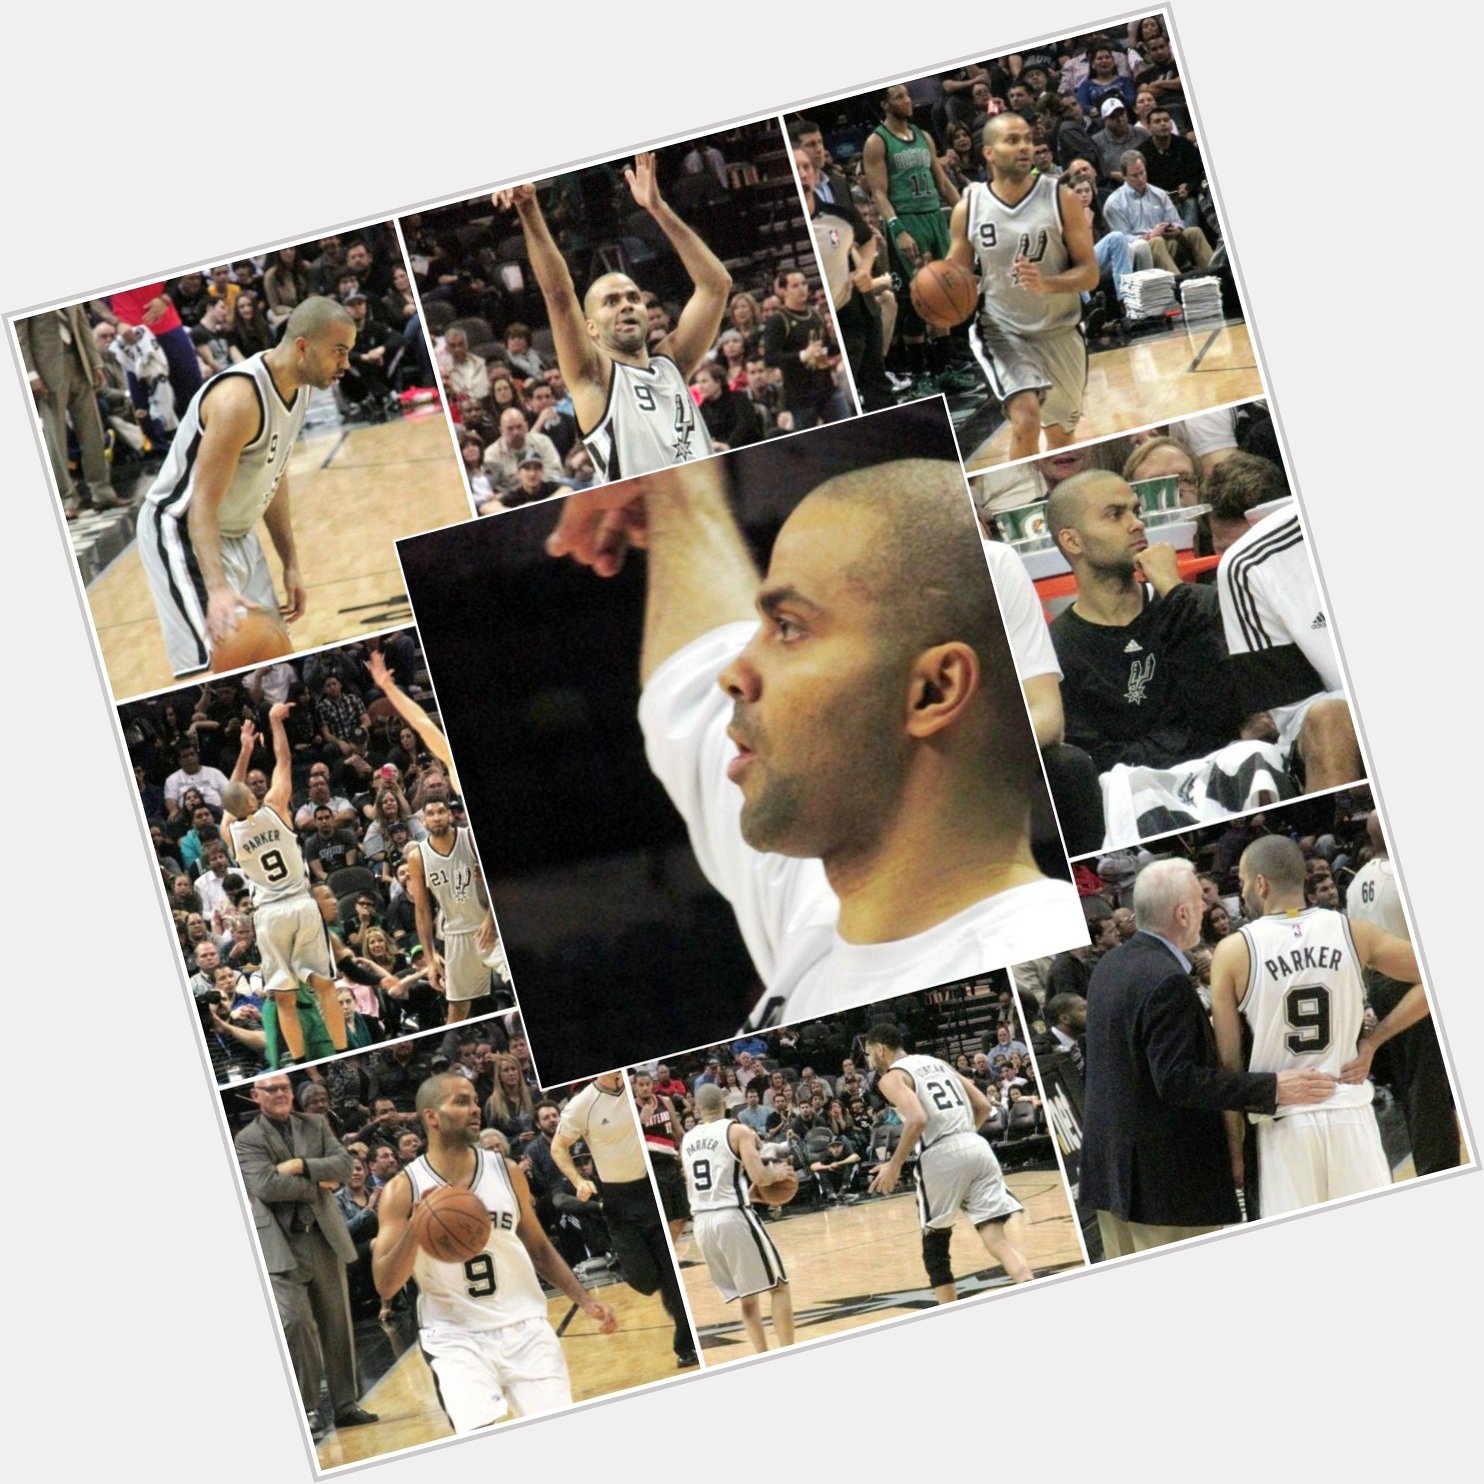 Happy Birthday to Tony Parker - some of my favorite photos from 2014-2015 